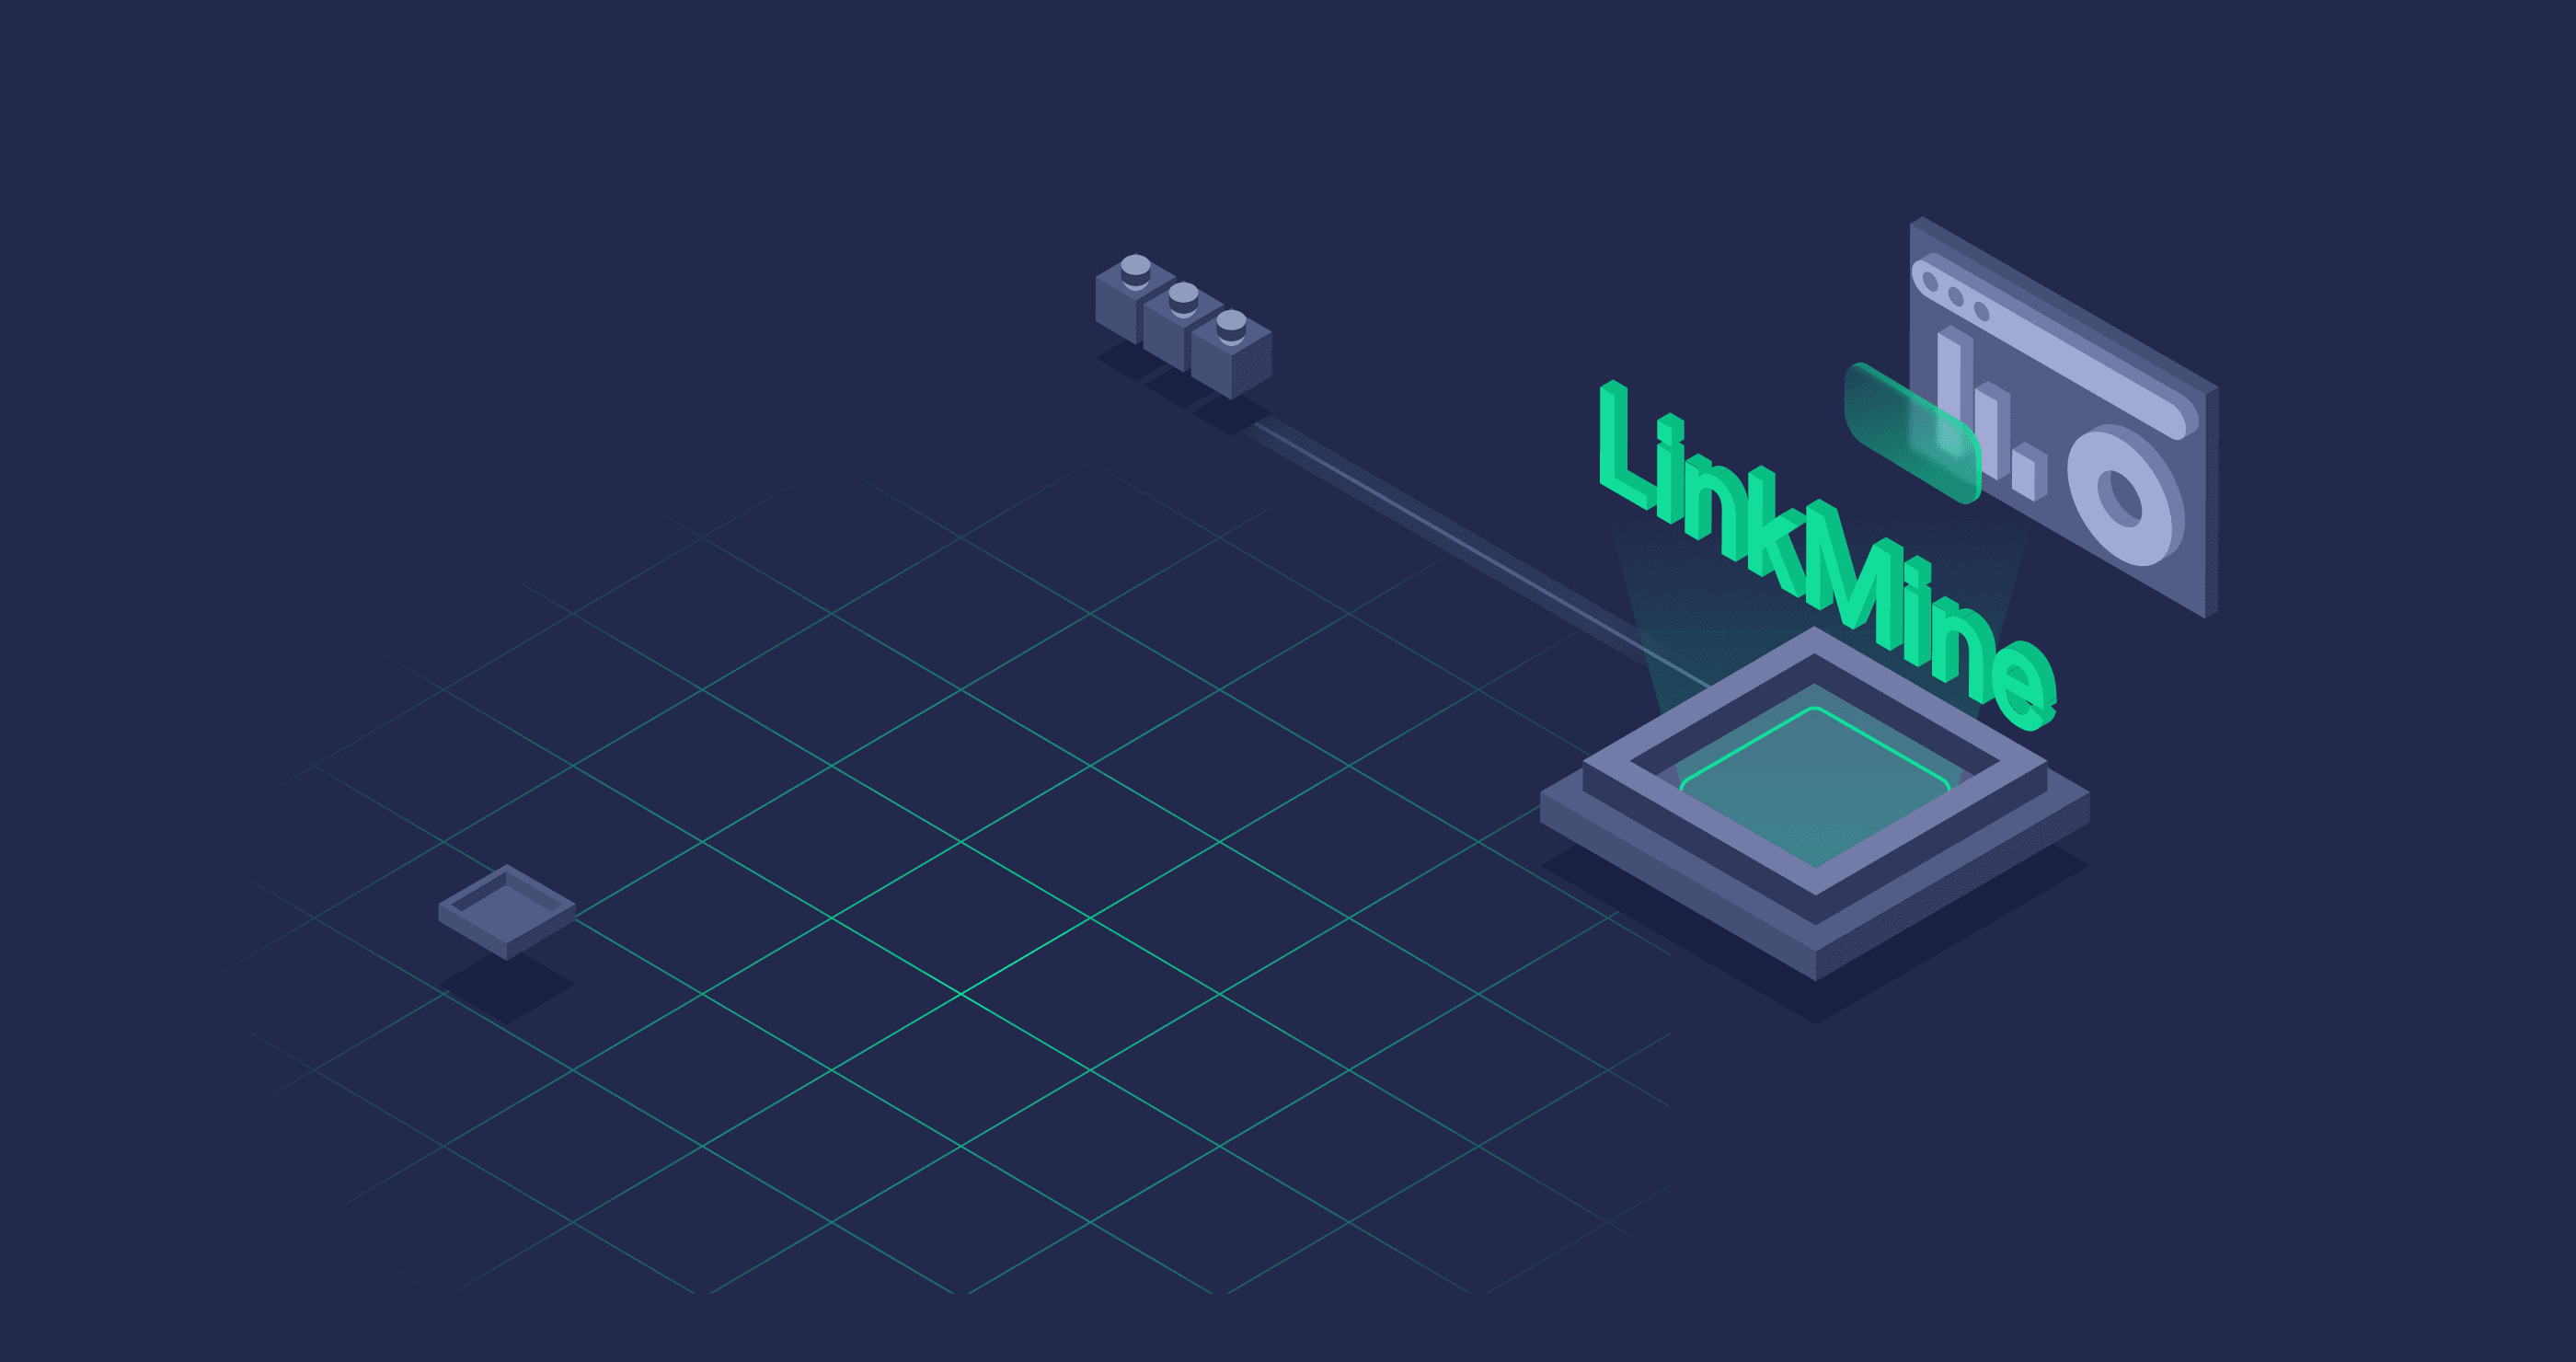 LinkMine offers you a unique opportunity